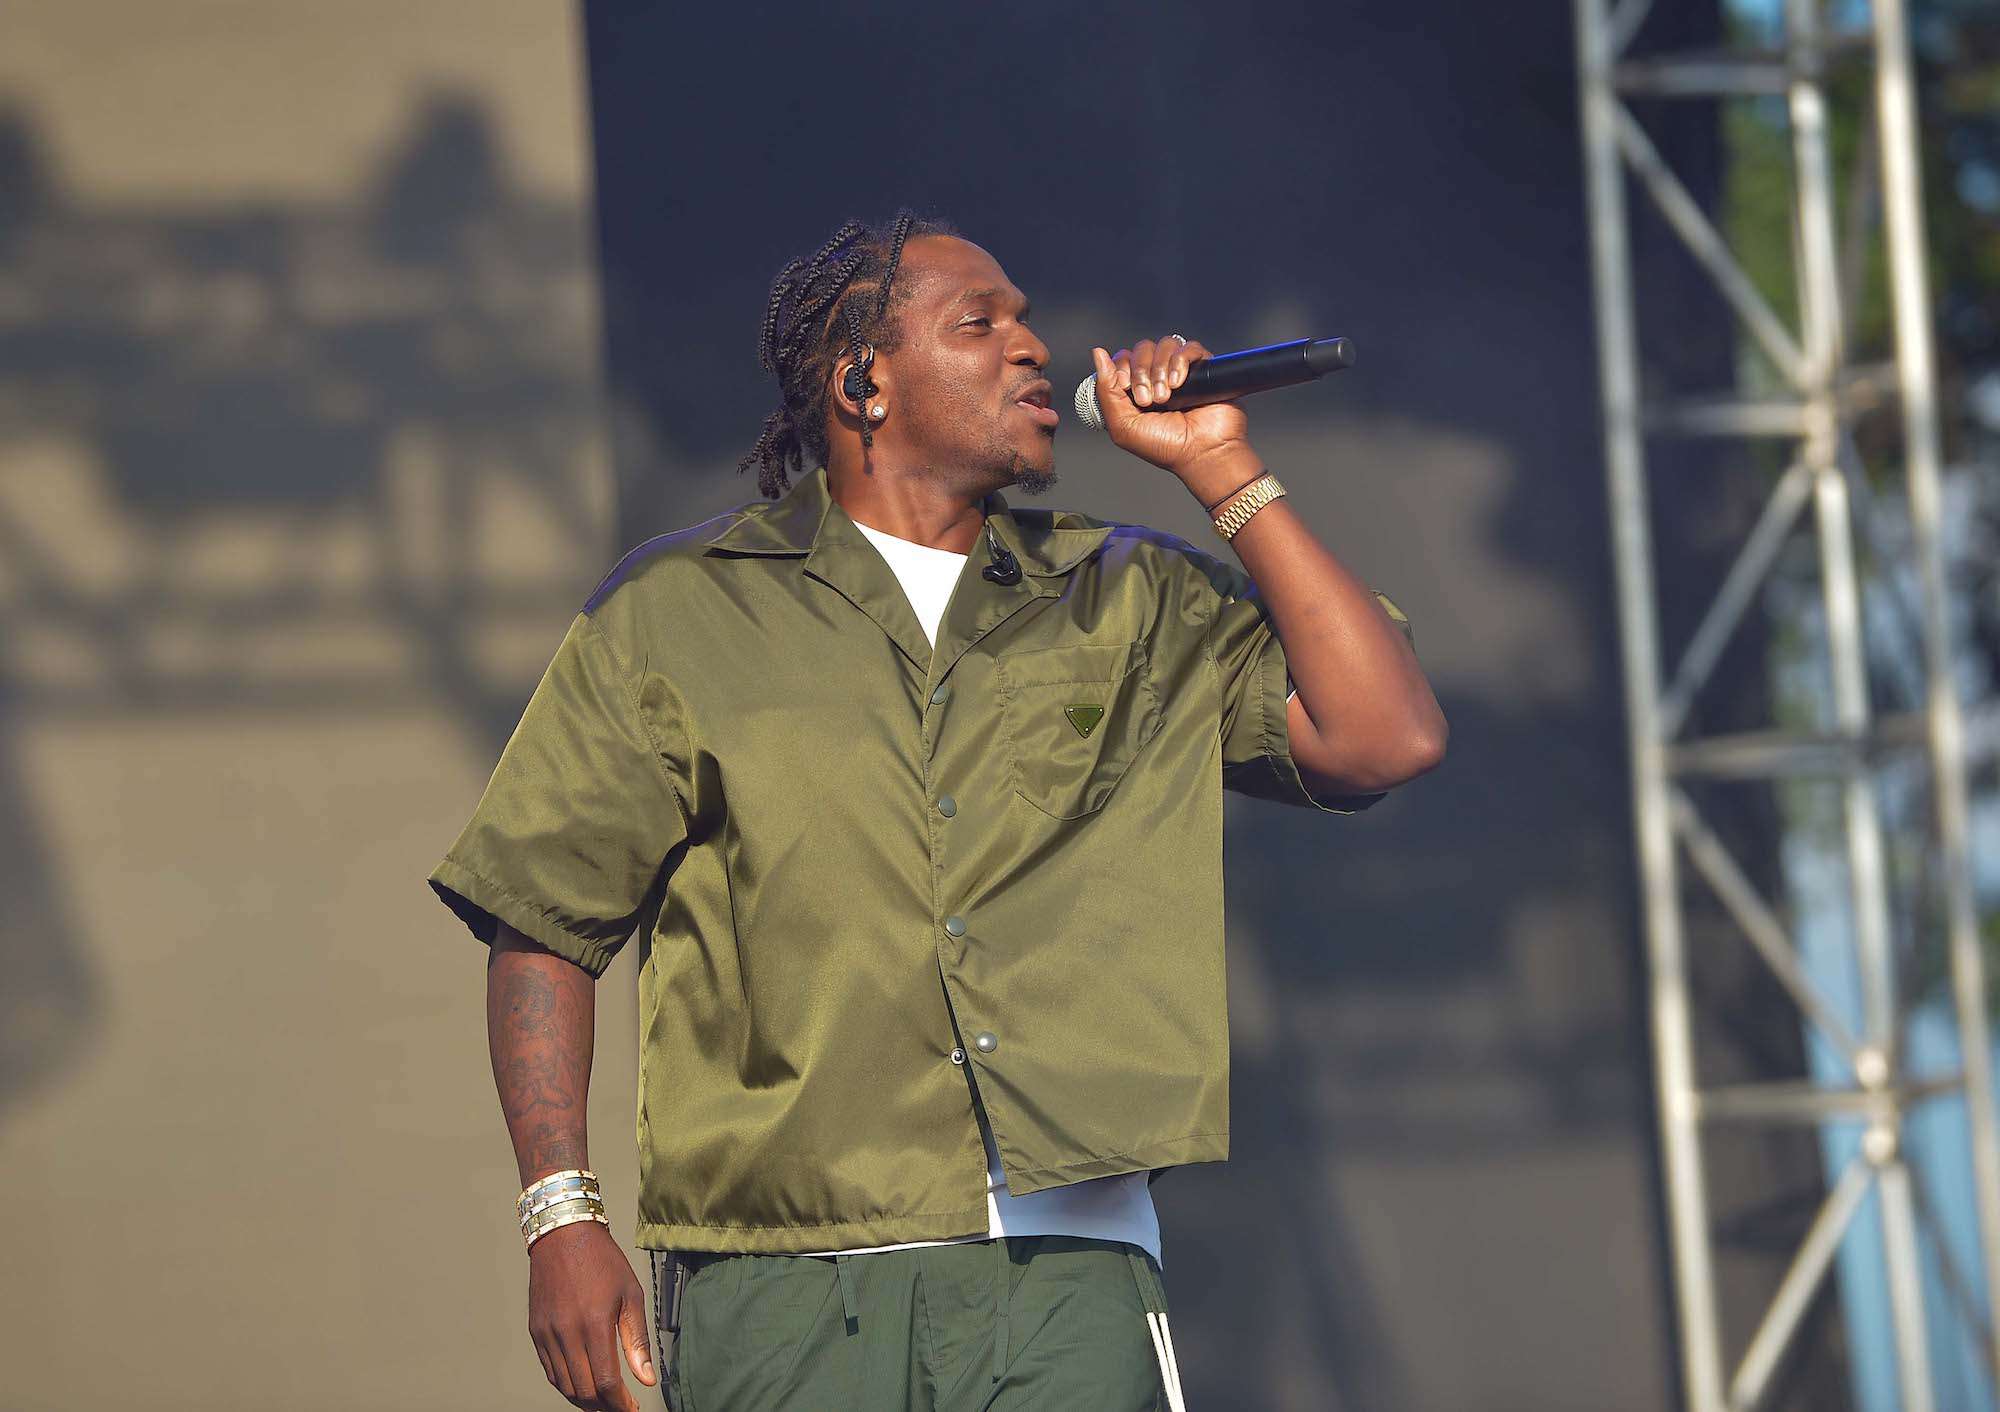 Pusha T Live at Pitchfork [GALLERY] 8